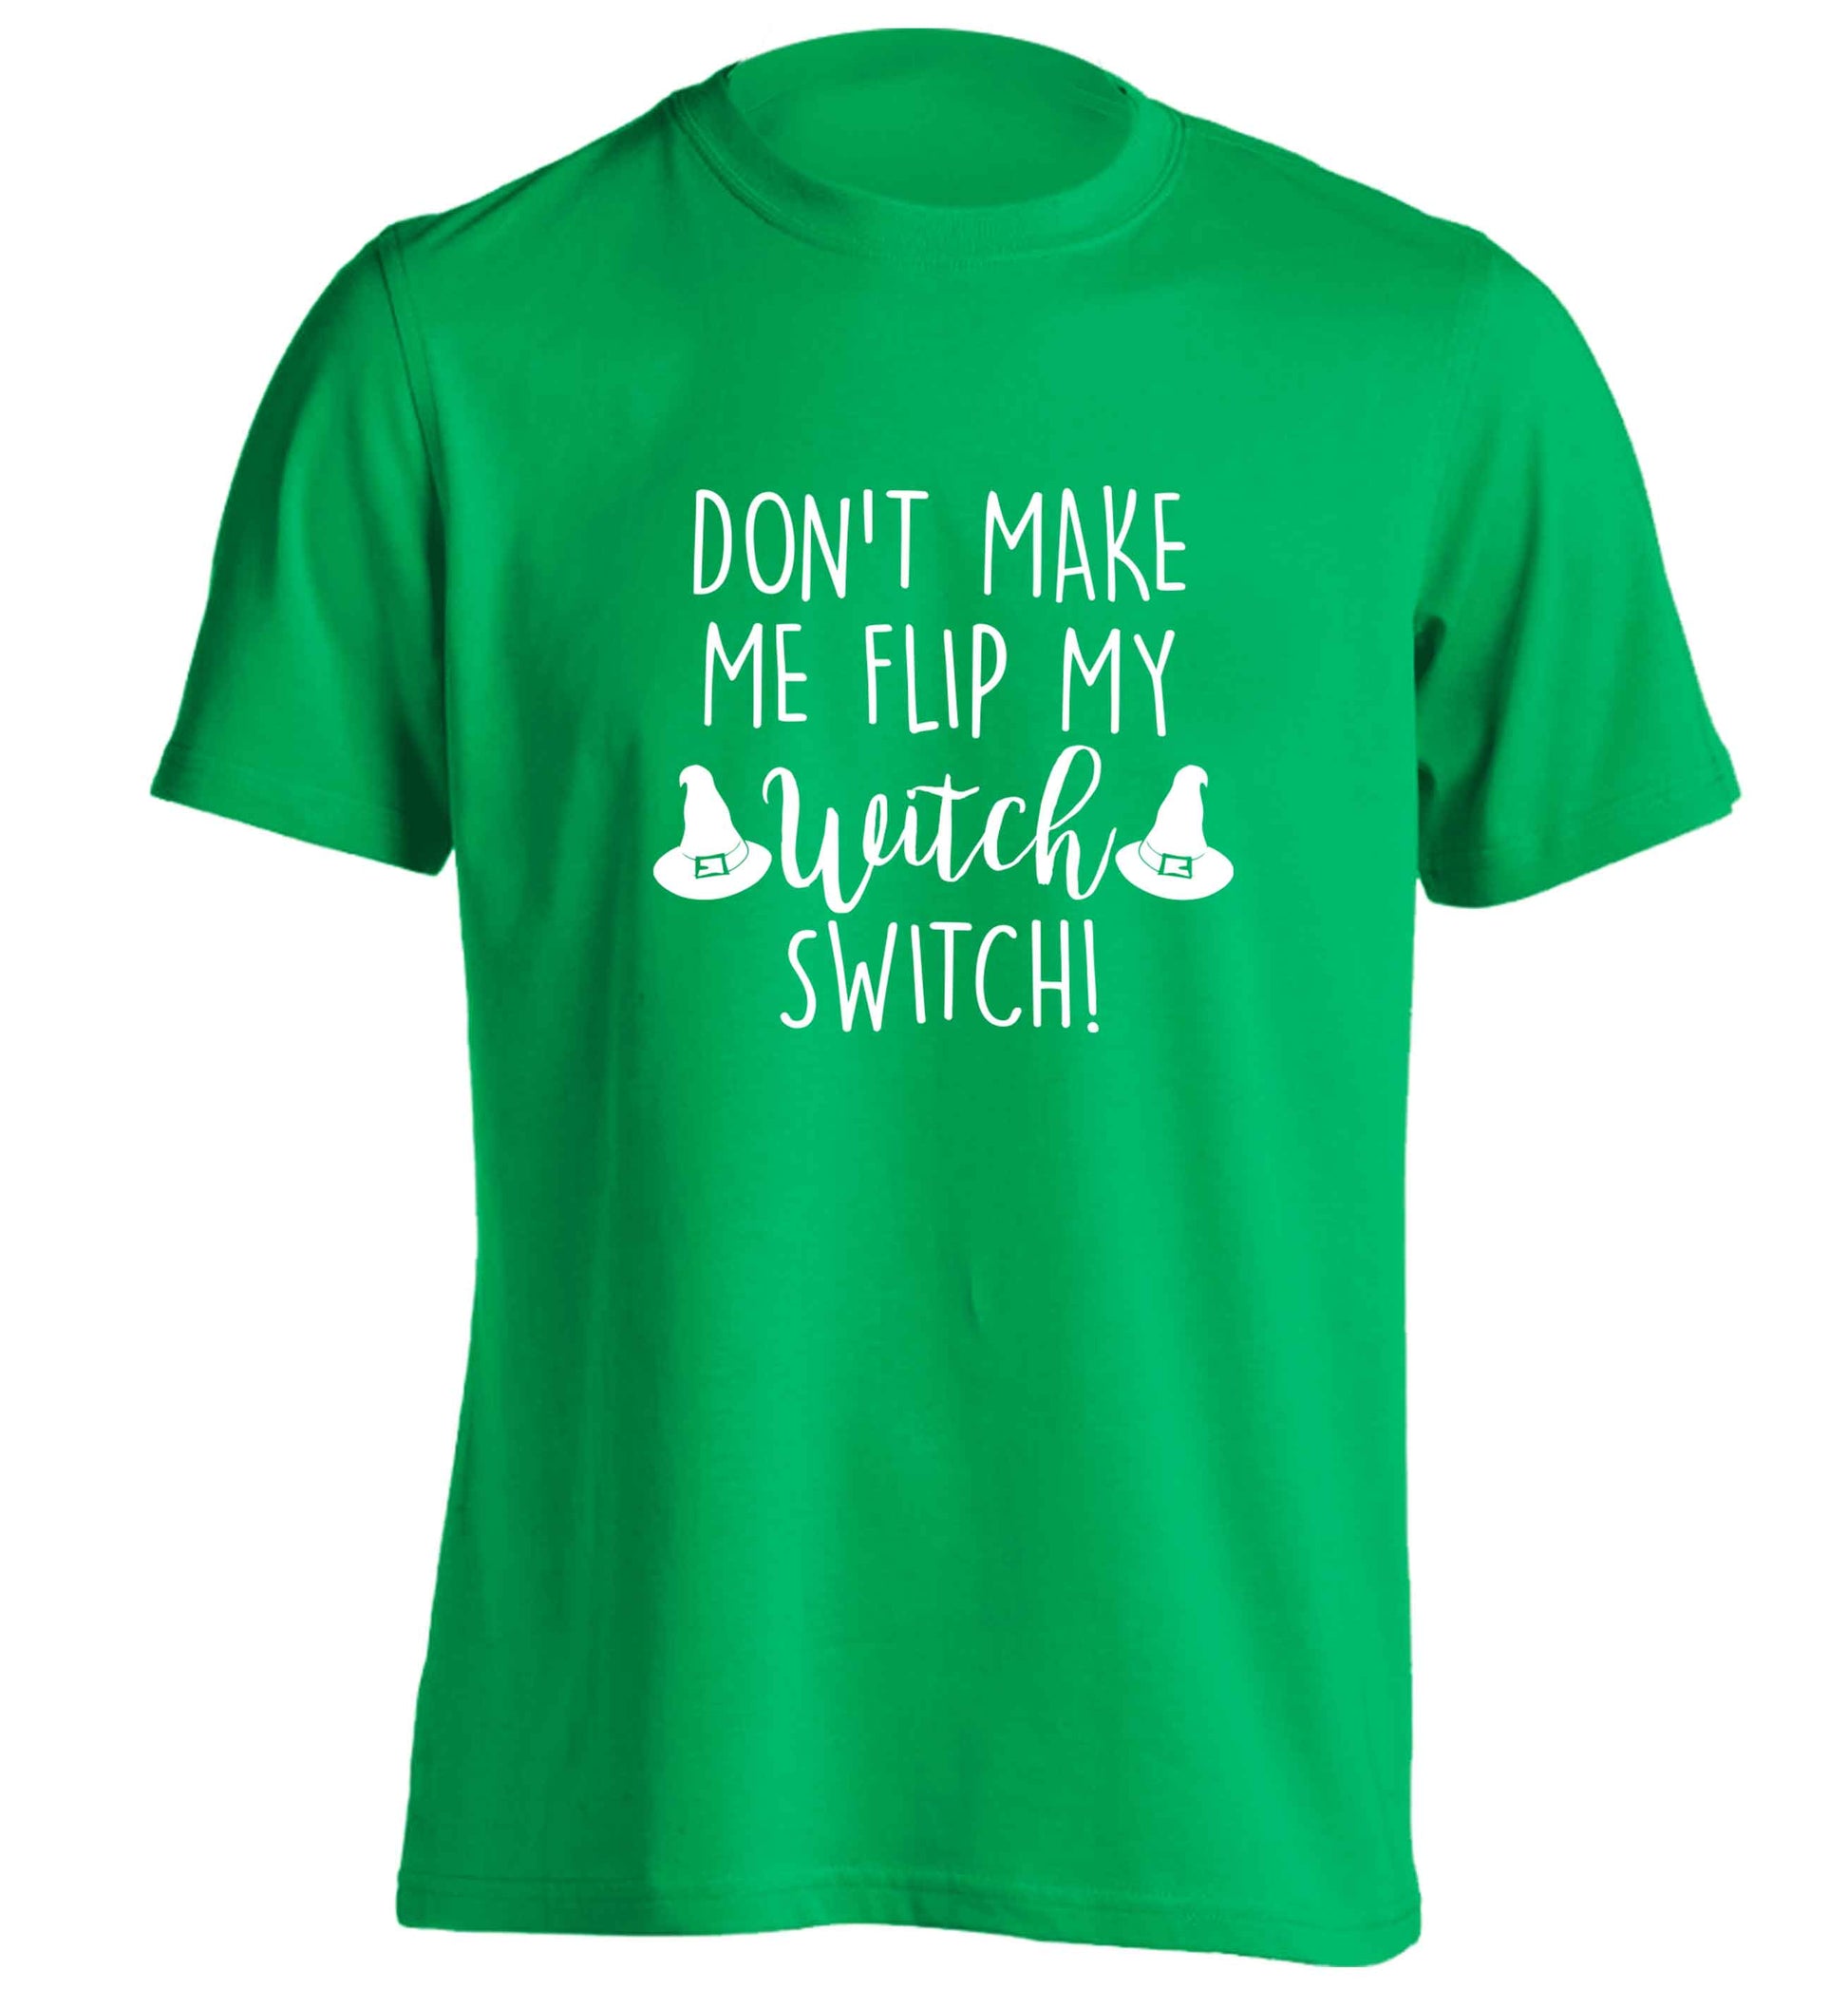 Don't make me flip my witch switch adults unisex green Tshirt 2XL